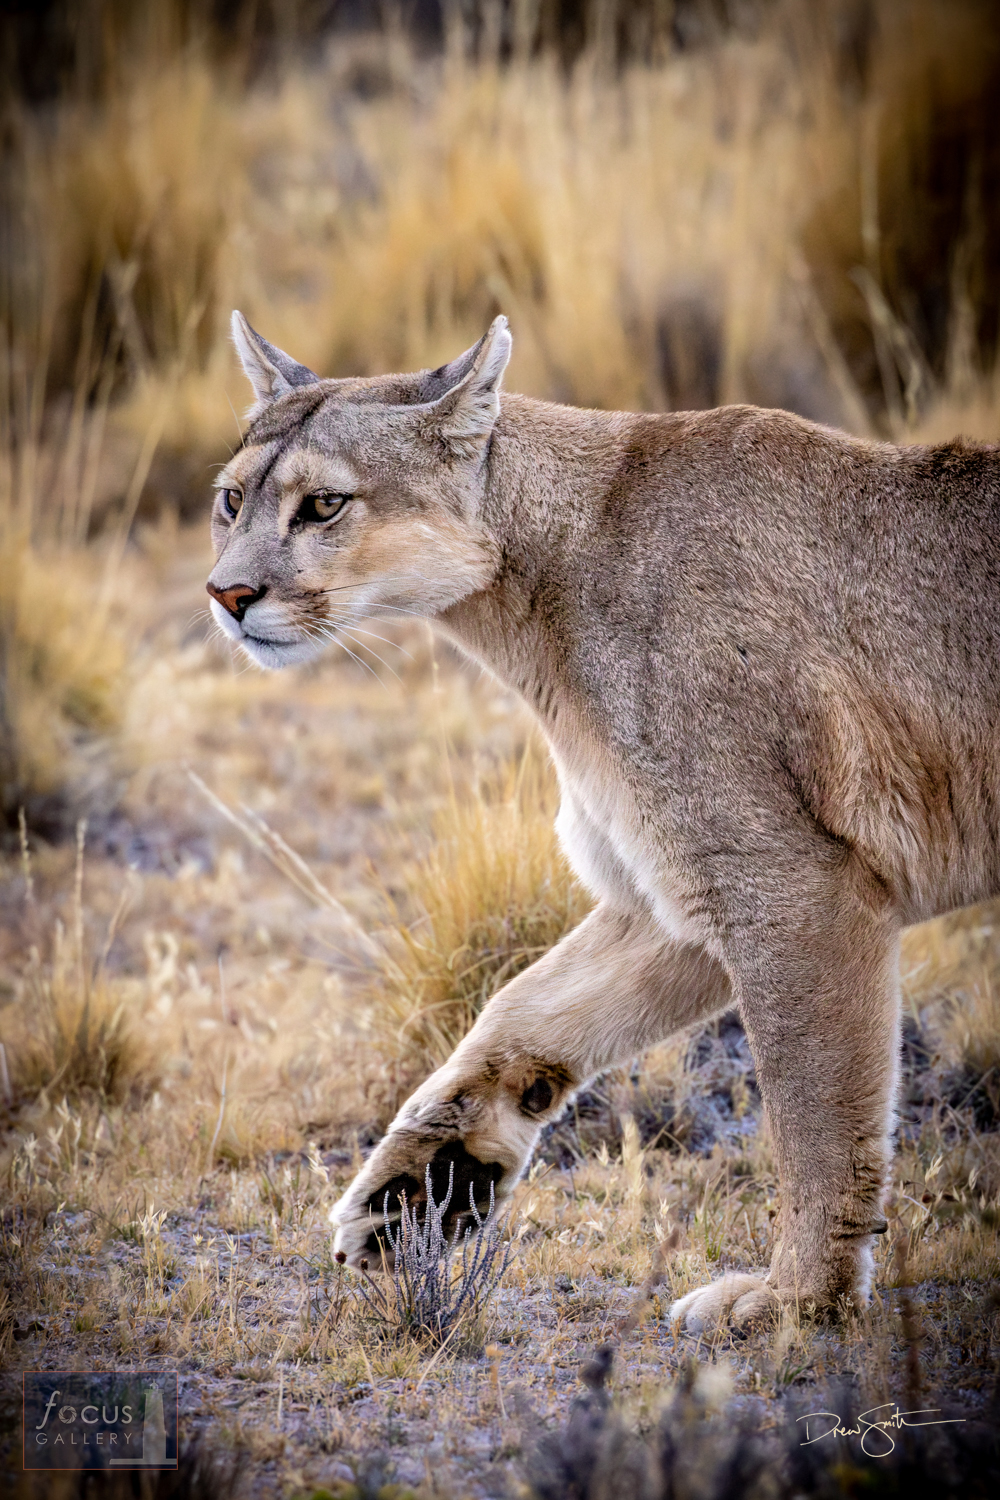 A puma   (aka cougar or mountain lion) on the prowl in the Patagonian steppe.  Puma-based ecotourism in recent years has   helped...